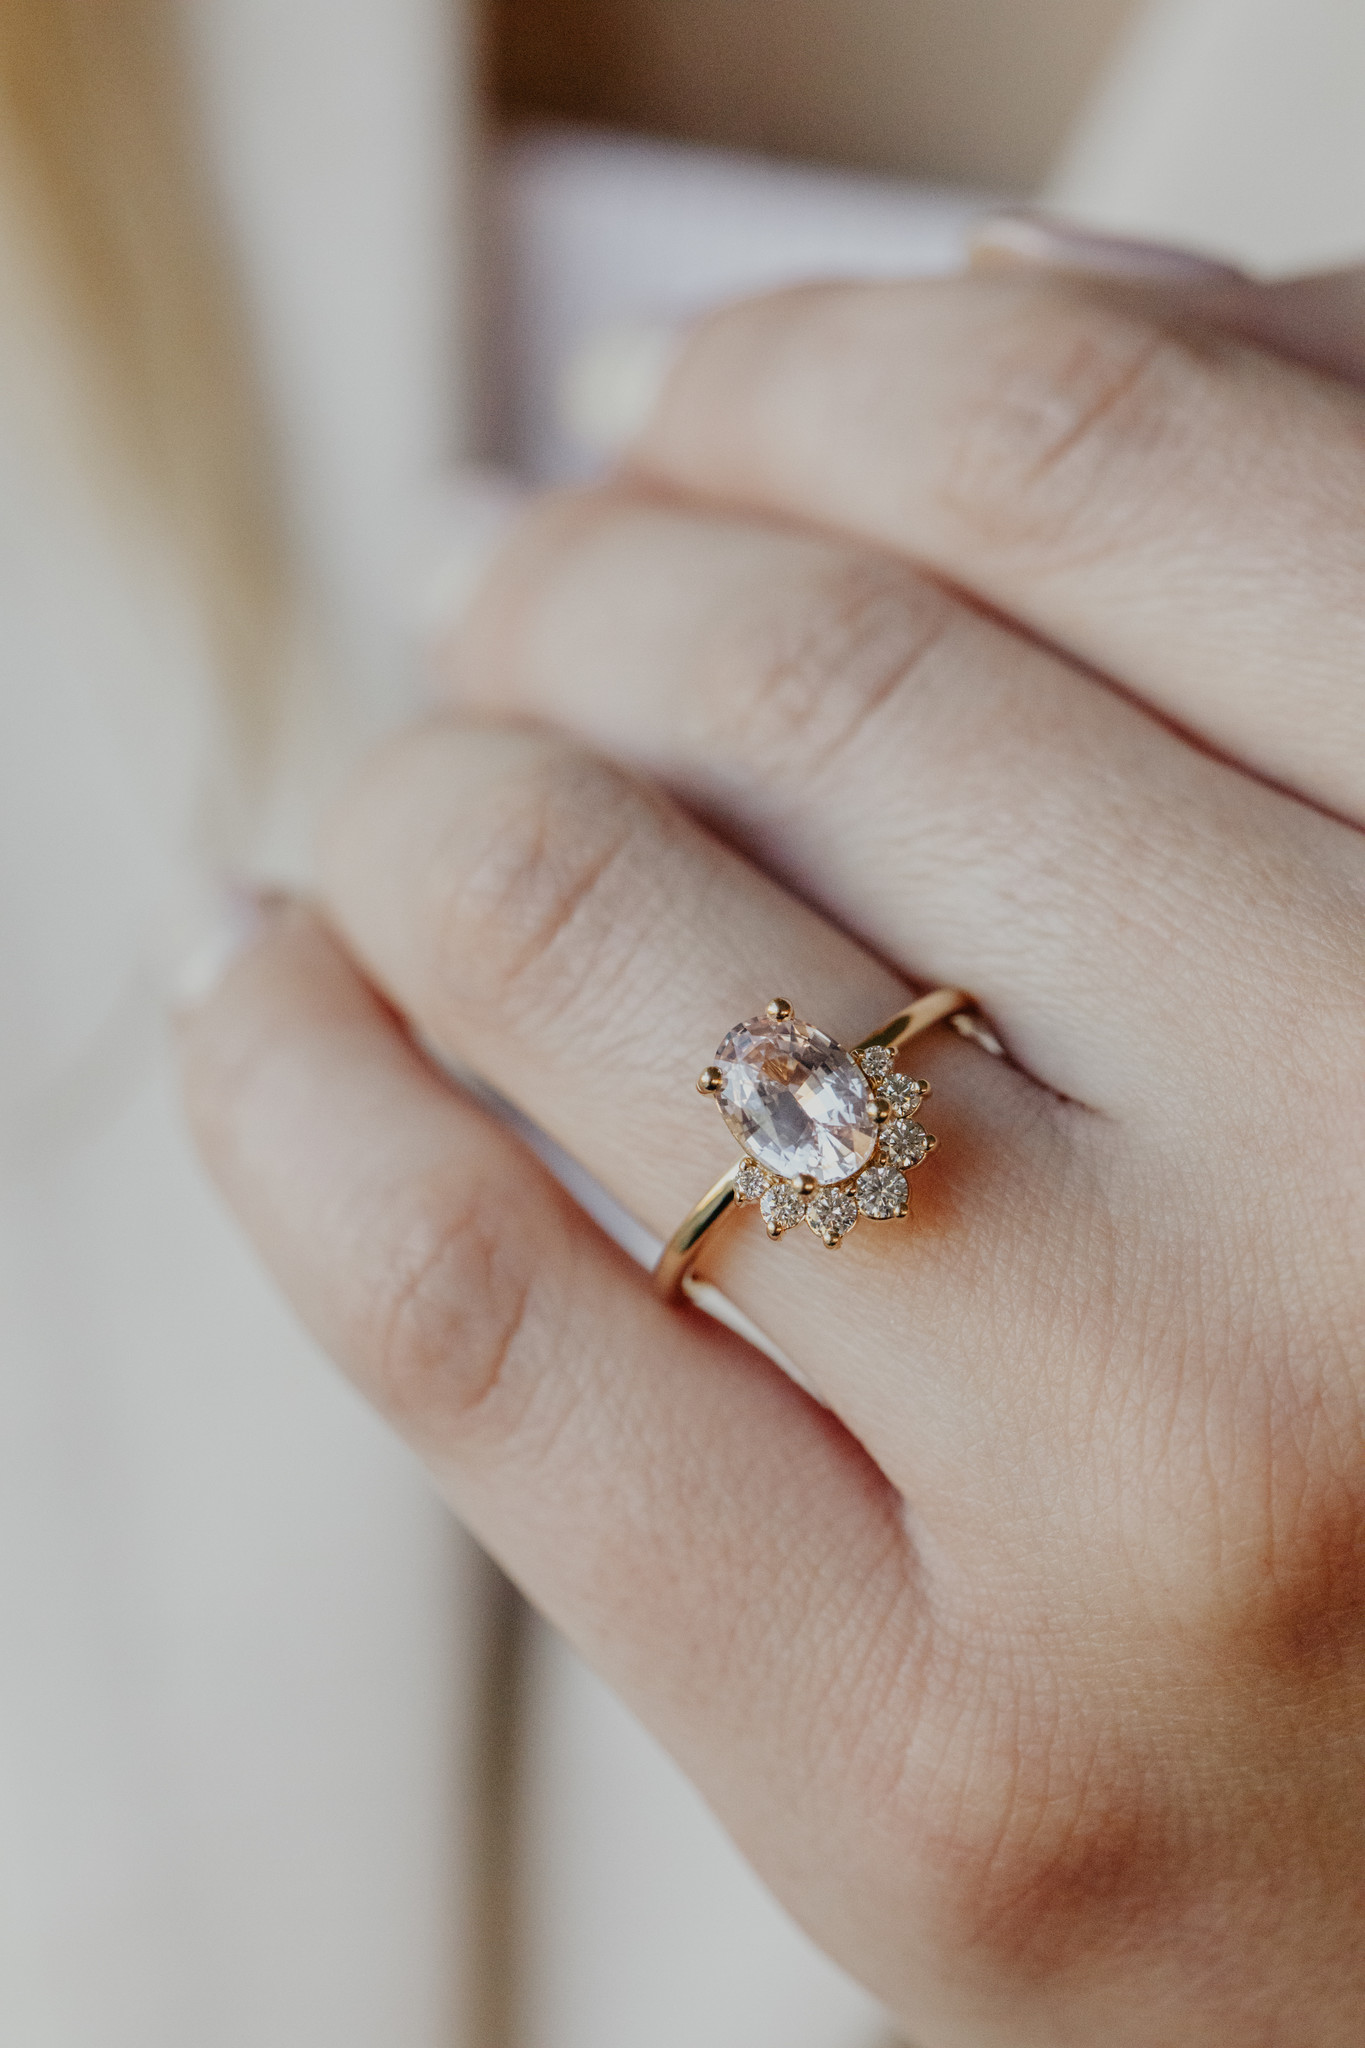 How to Reset a Diamond Ring: The Complete Guide